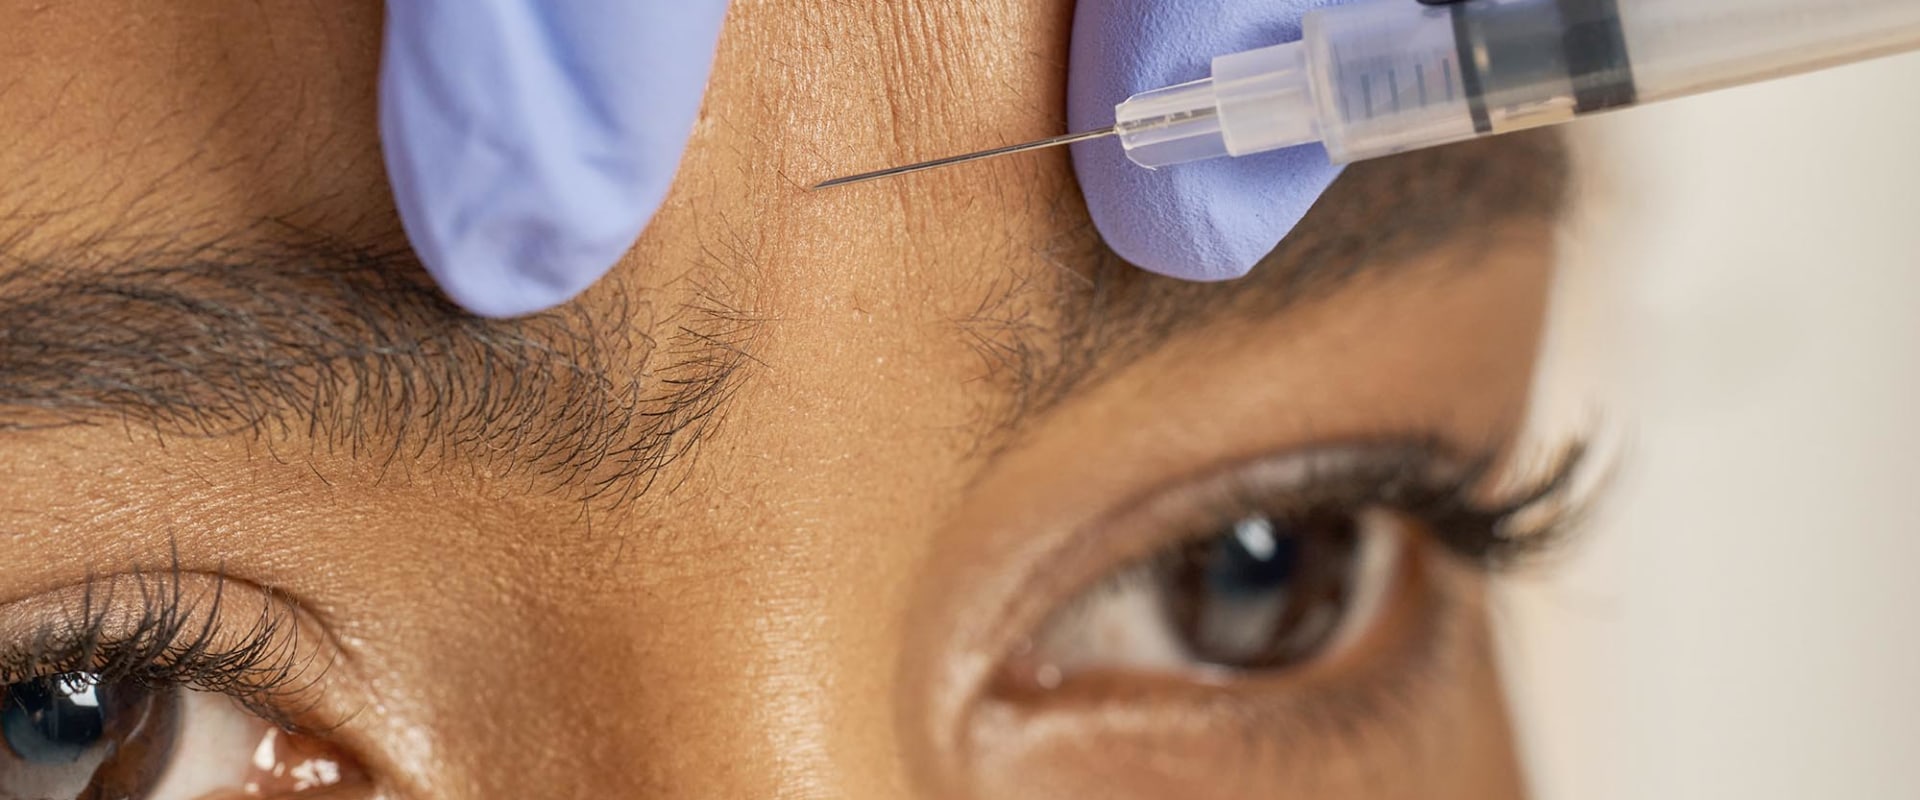 Are Fillers Injected Into the Muscle? An Expert's Perspective